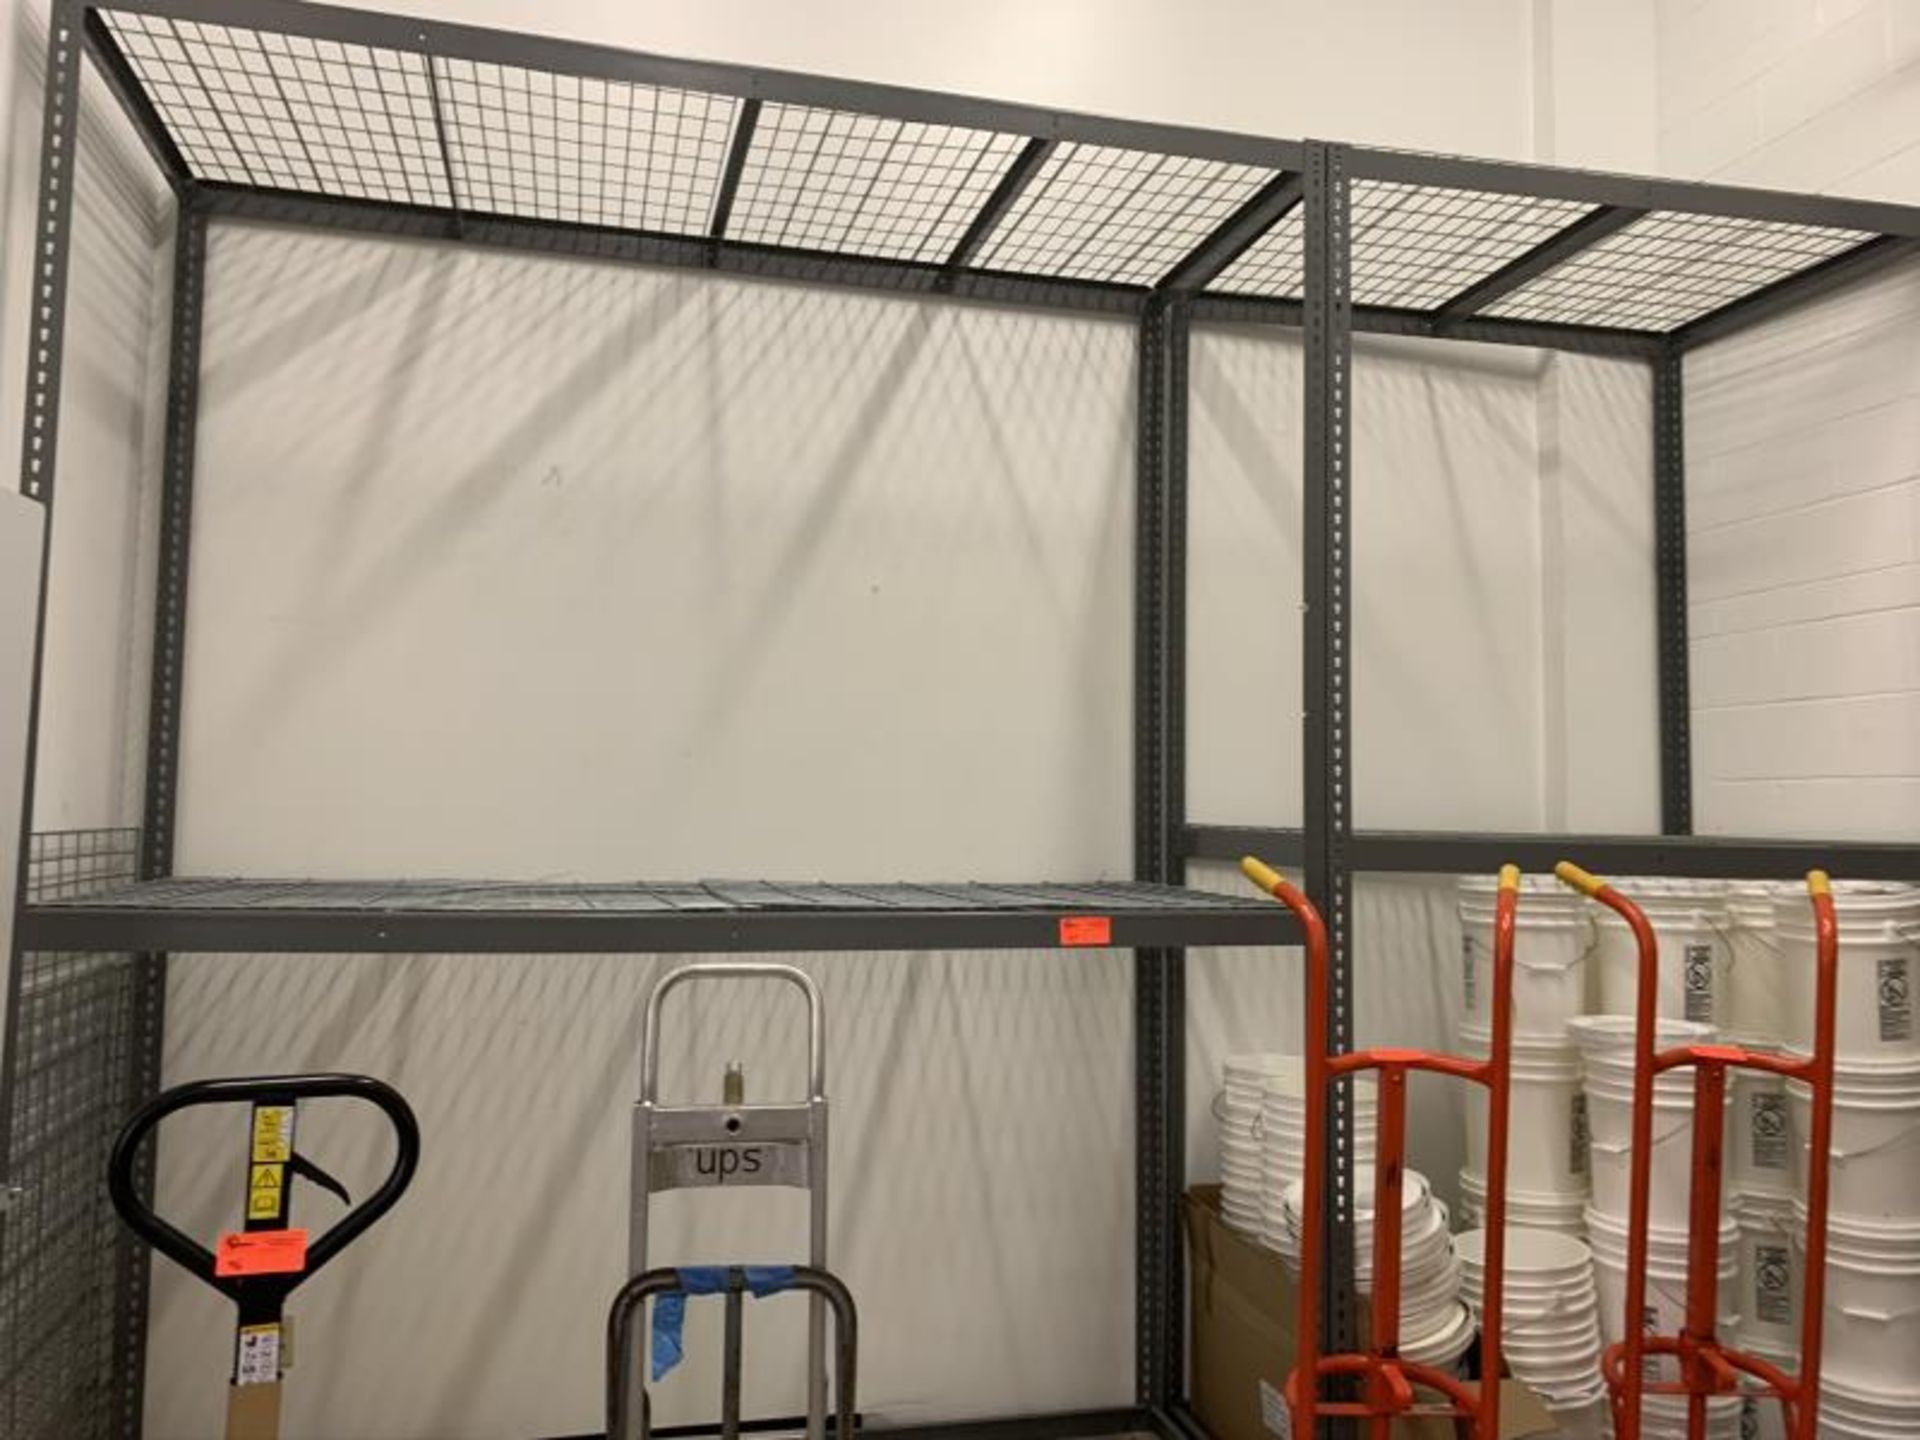 2 Sections Grey Metal Racking w/ Metal Wire Grid Shelves - Image 2 of 4